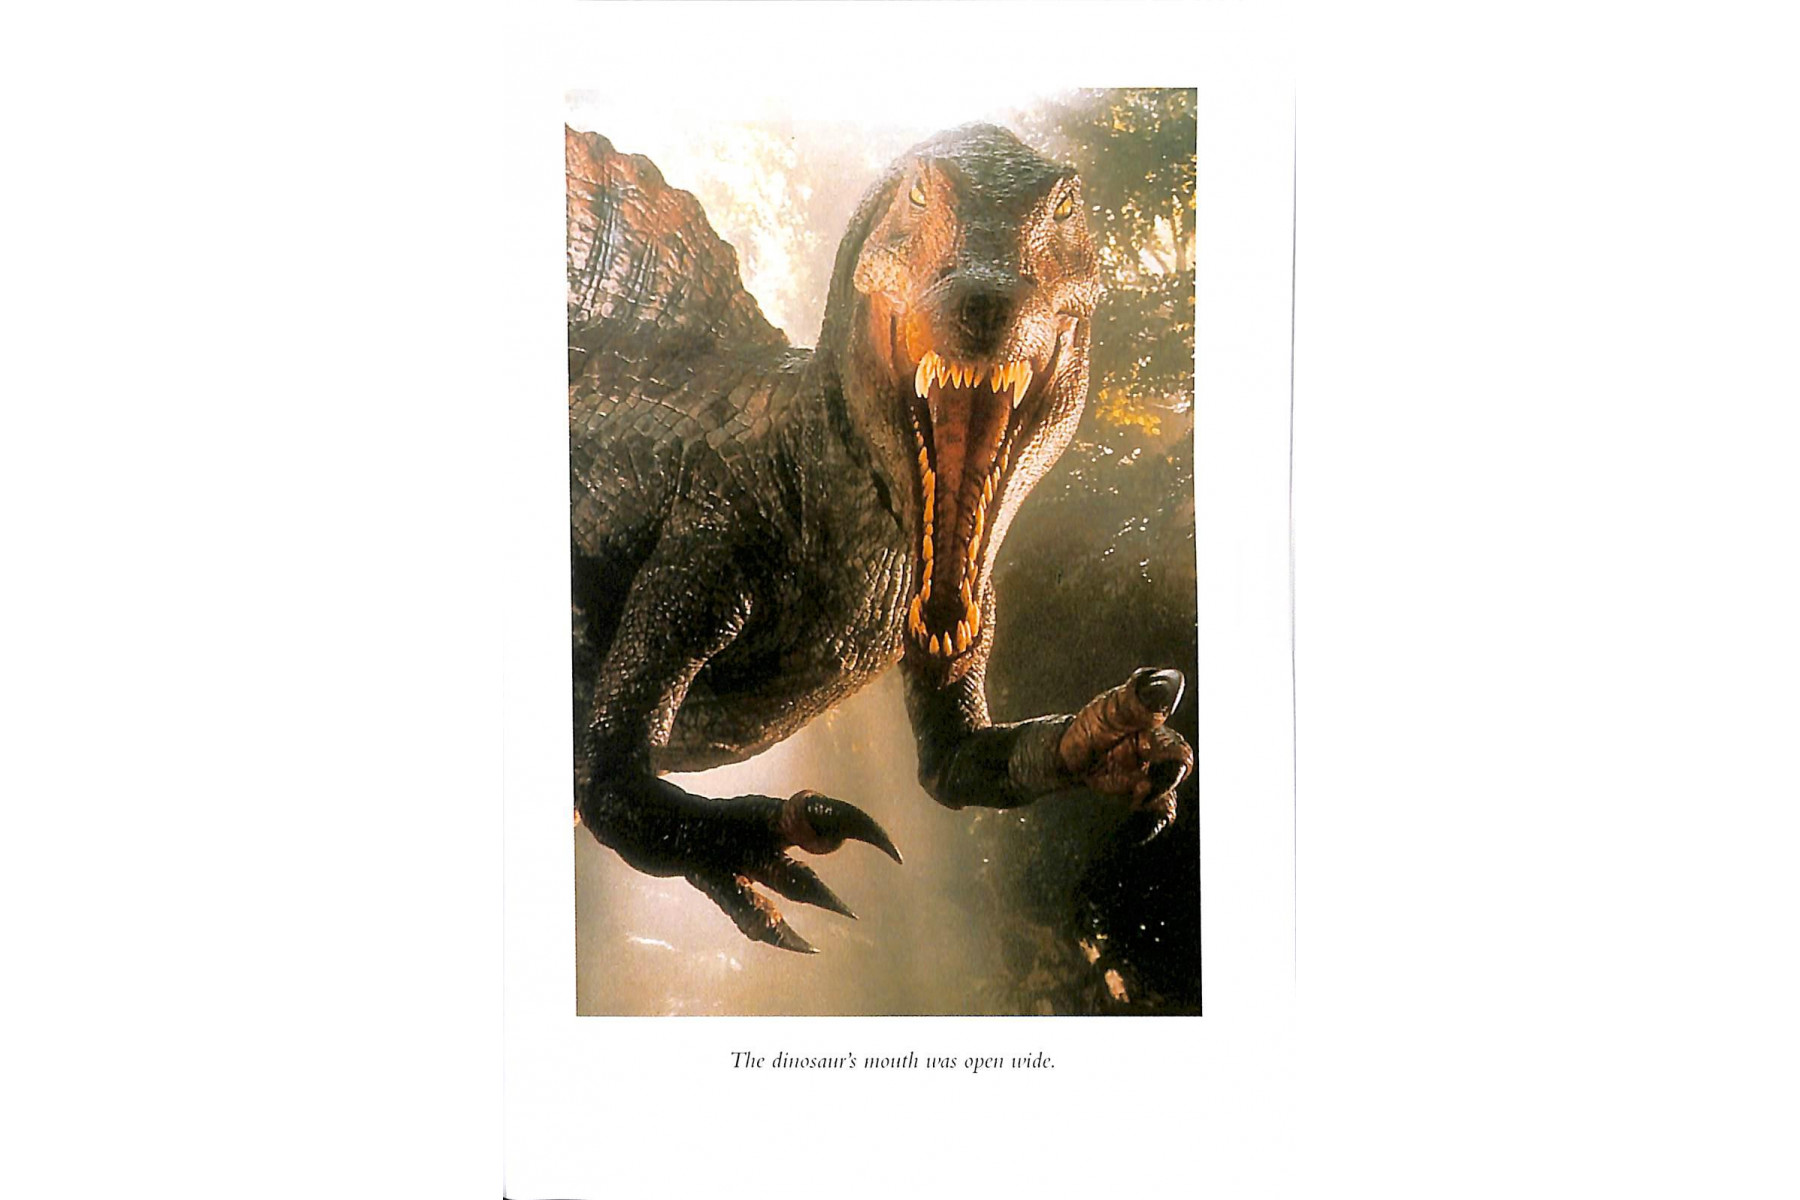 PR 2: Jurassic Park 3 Book and MP3 Pack